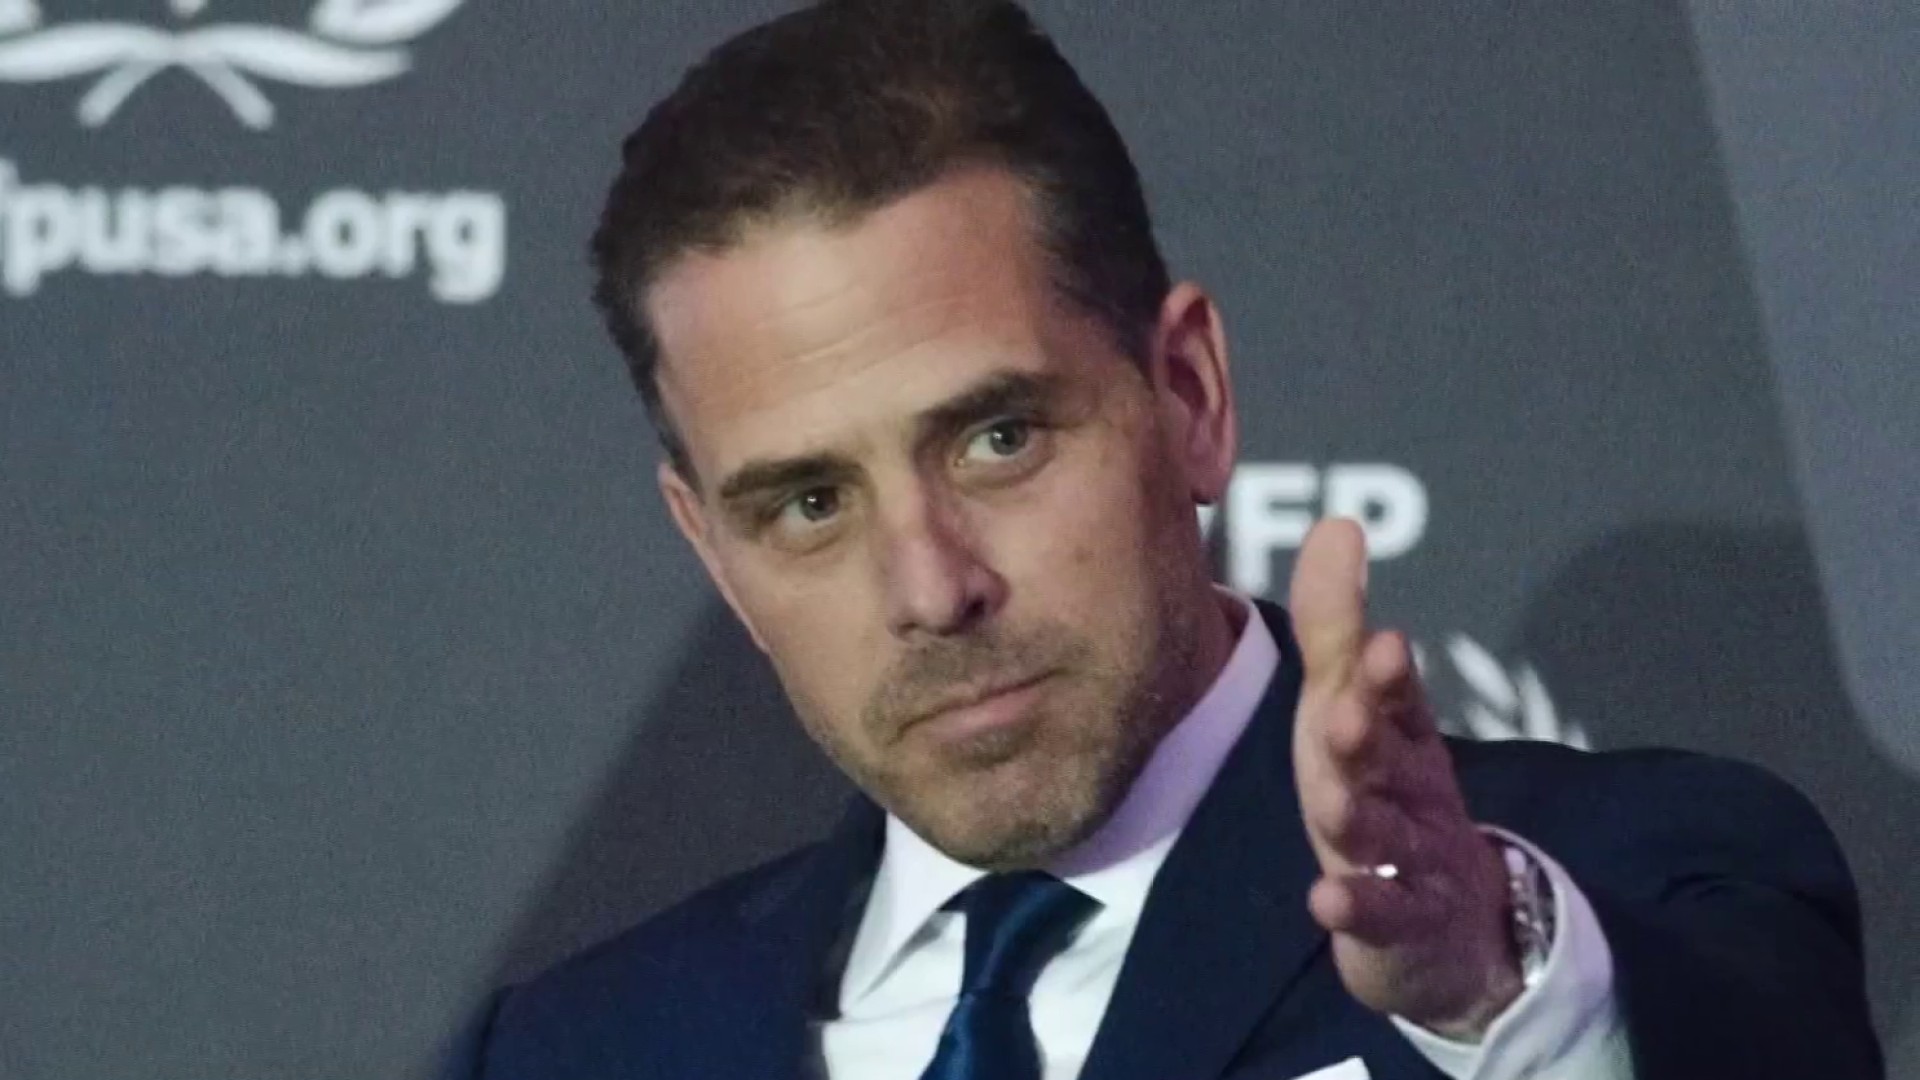 Full special report: Hunter Biden indicted on federal gun charges